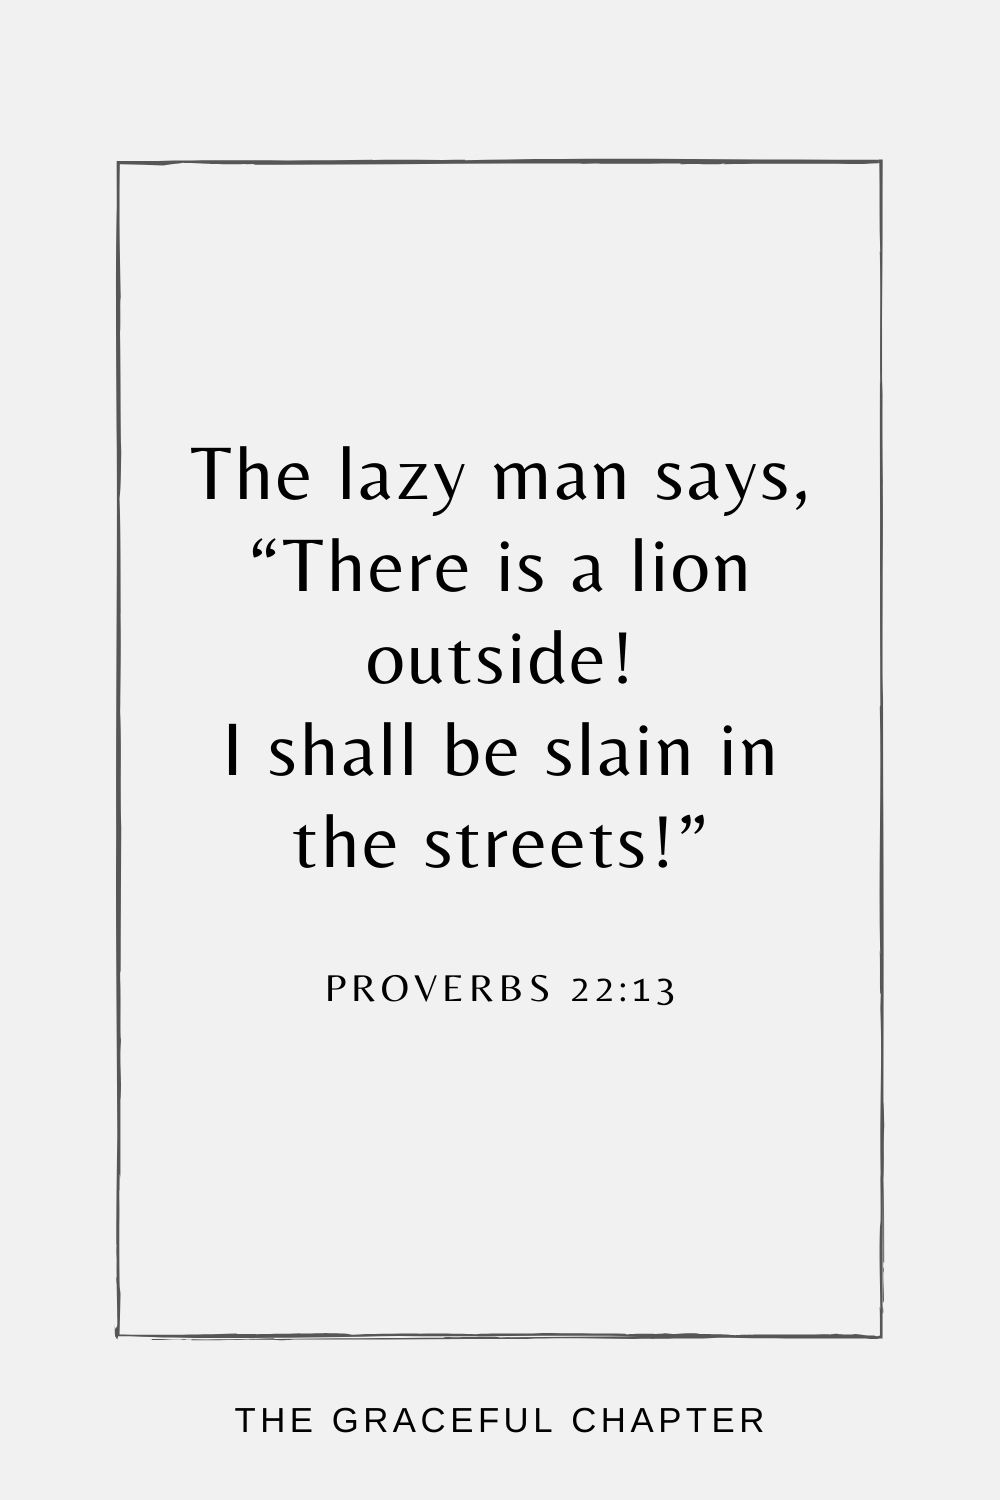 The lazy man says, “There is a lion outside! I shall be slain in the streets!” Proverbs 22:13